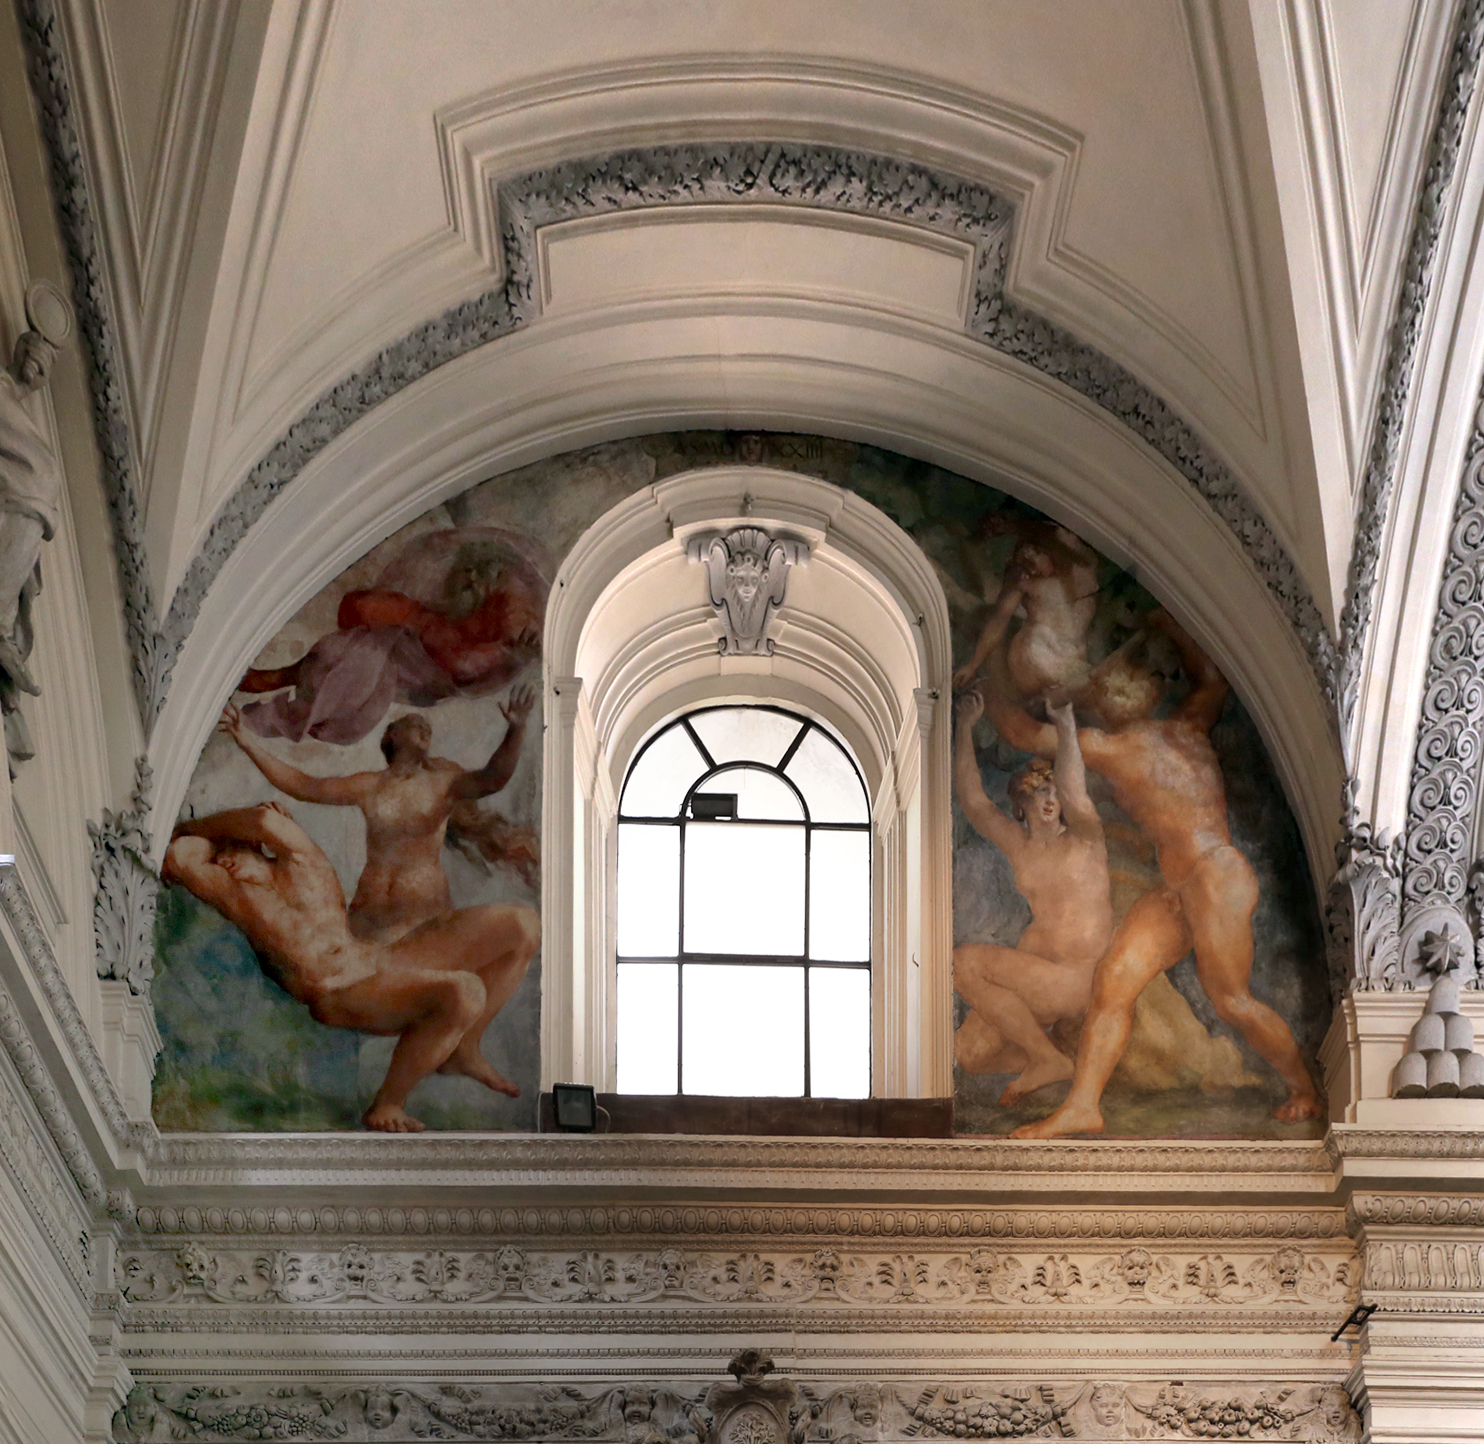 Rosso fiorentino mural on the upper-wall of a grand room. There is an arched-window in the center with various naked figures surrounding it. 